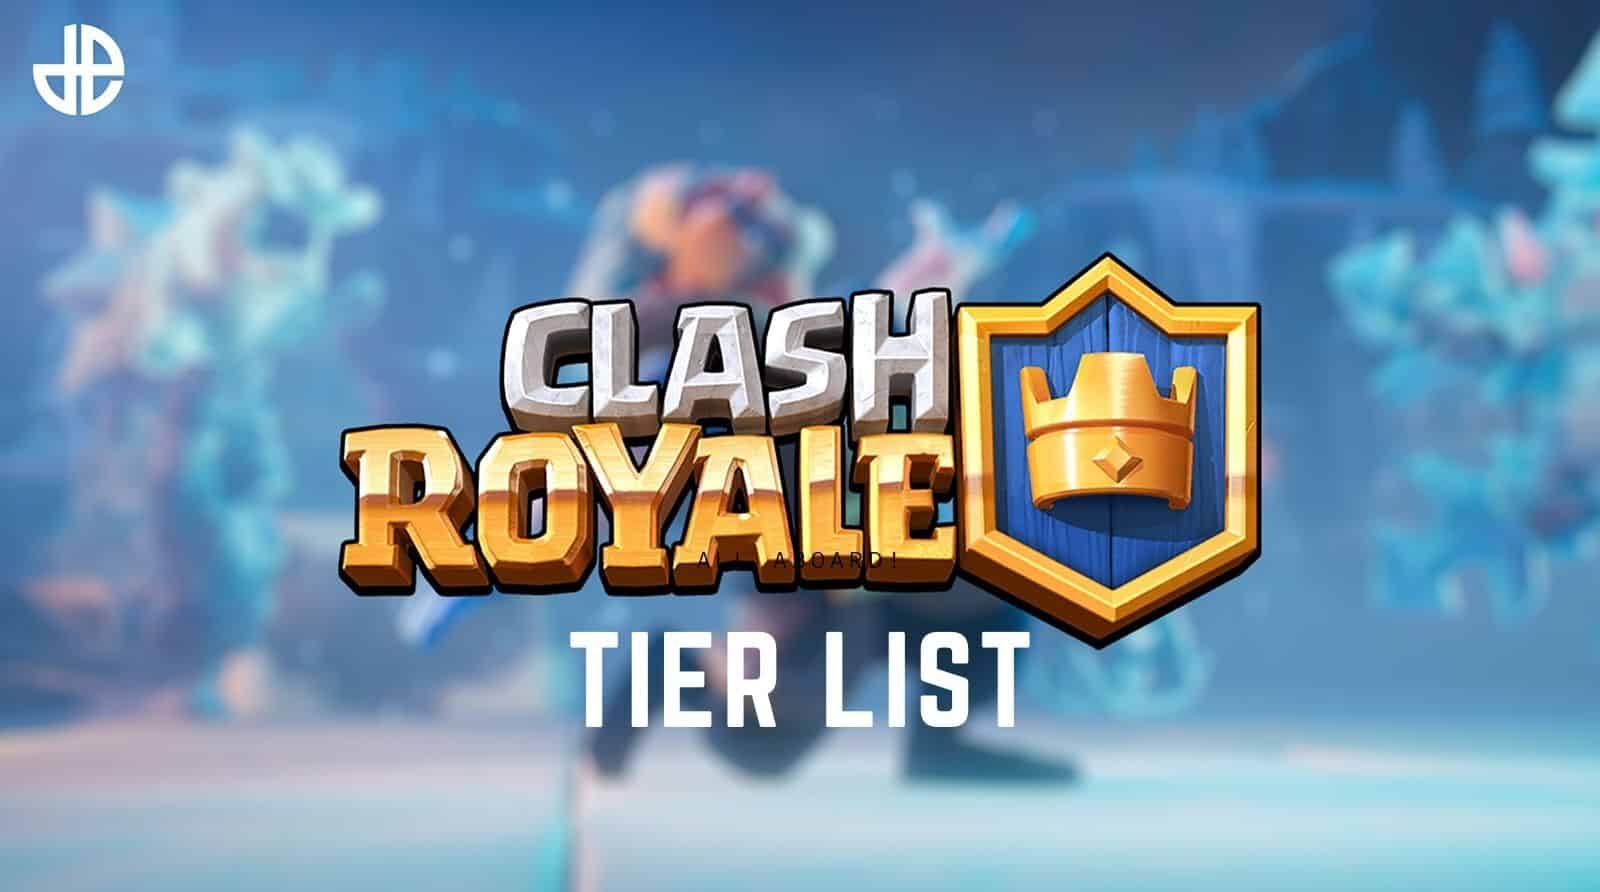 Cover for Clash Royale tier list featuring the frost wizard in the background